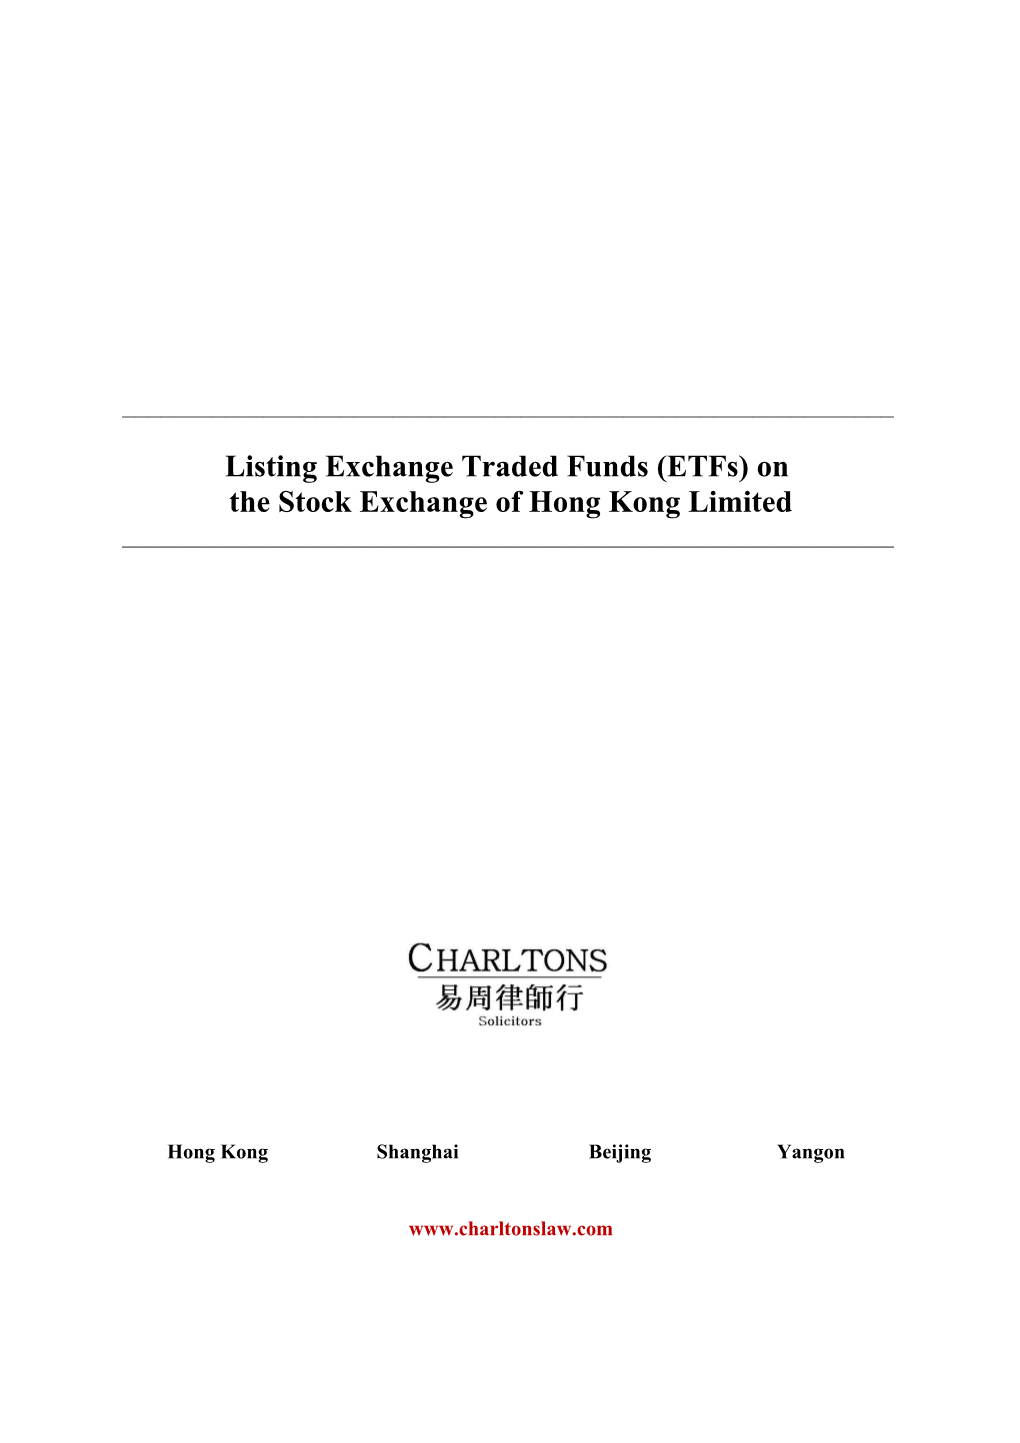 Listing Exchange Traded Funds (Etfs) on the Stock Exchange of Hong Kong Limited